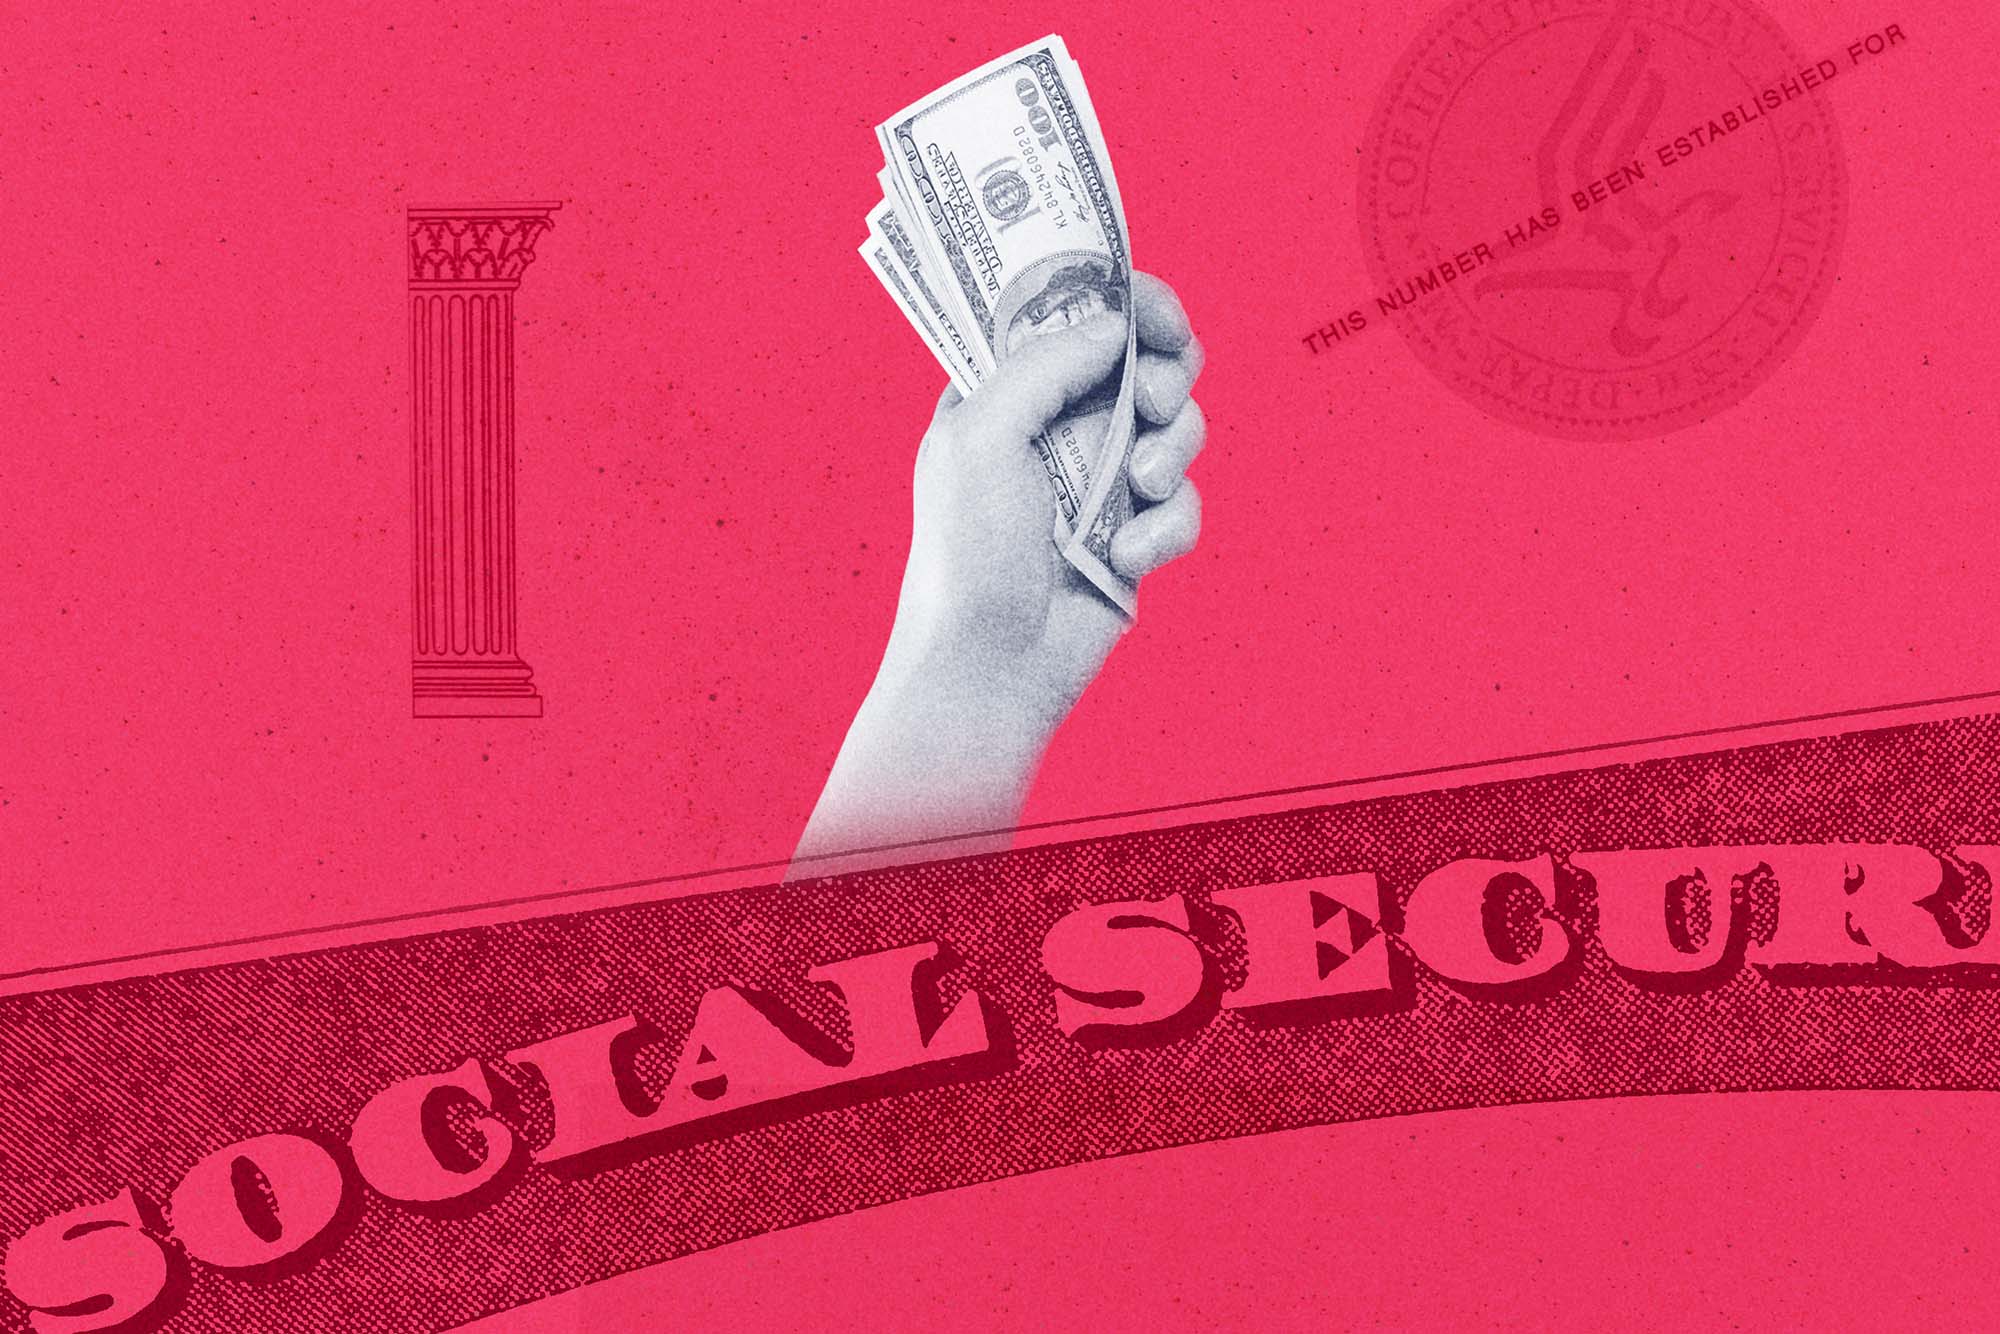 Illustration with a hand holding multiple 100 dollar bills and the top of a Social Security Card